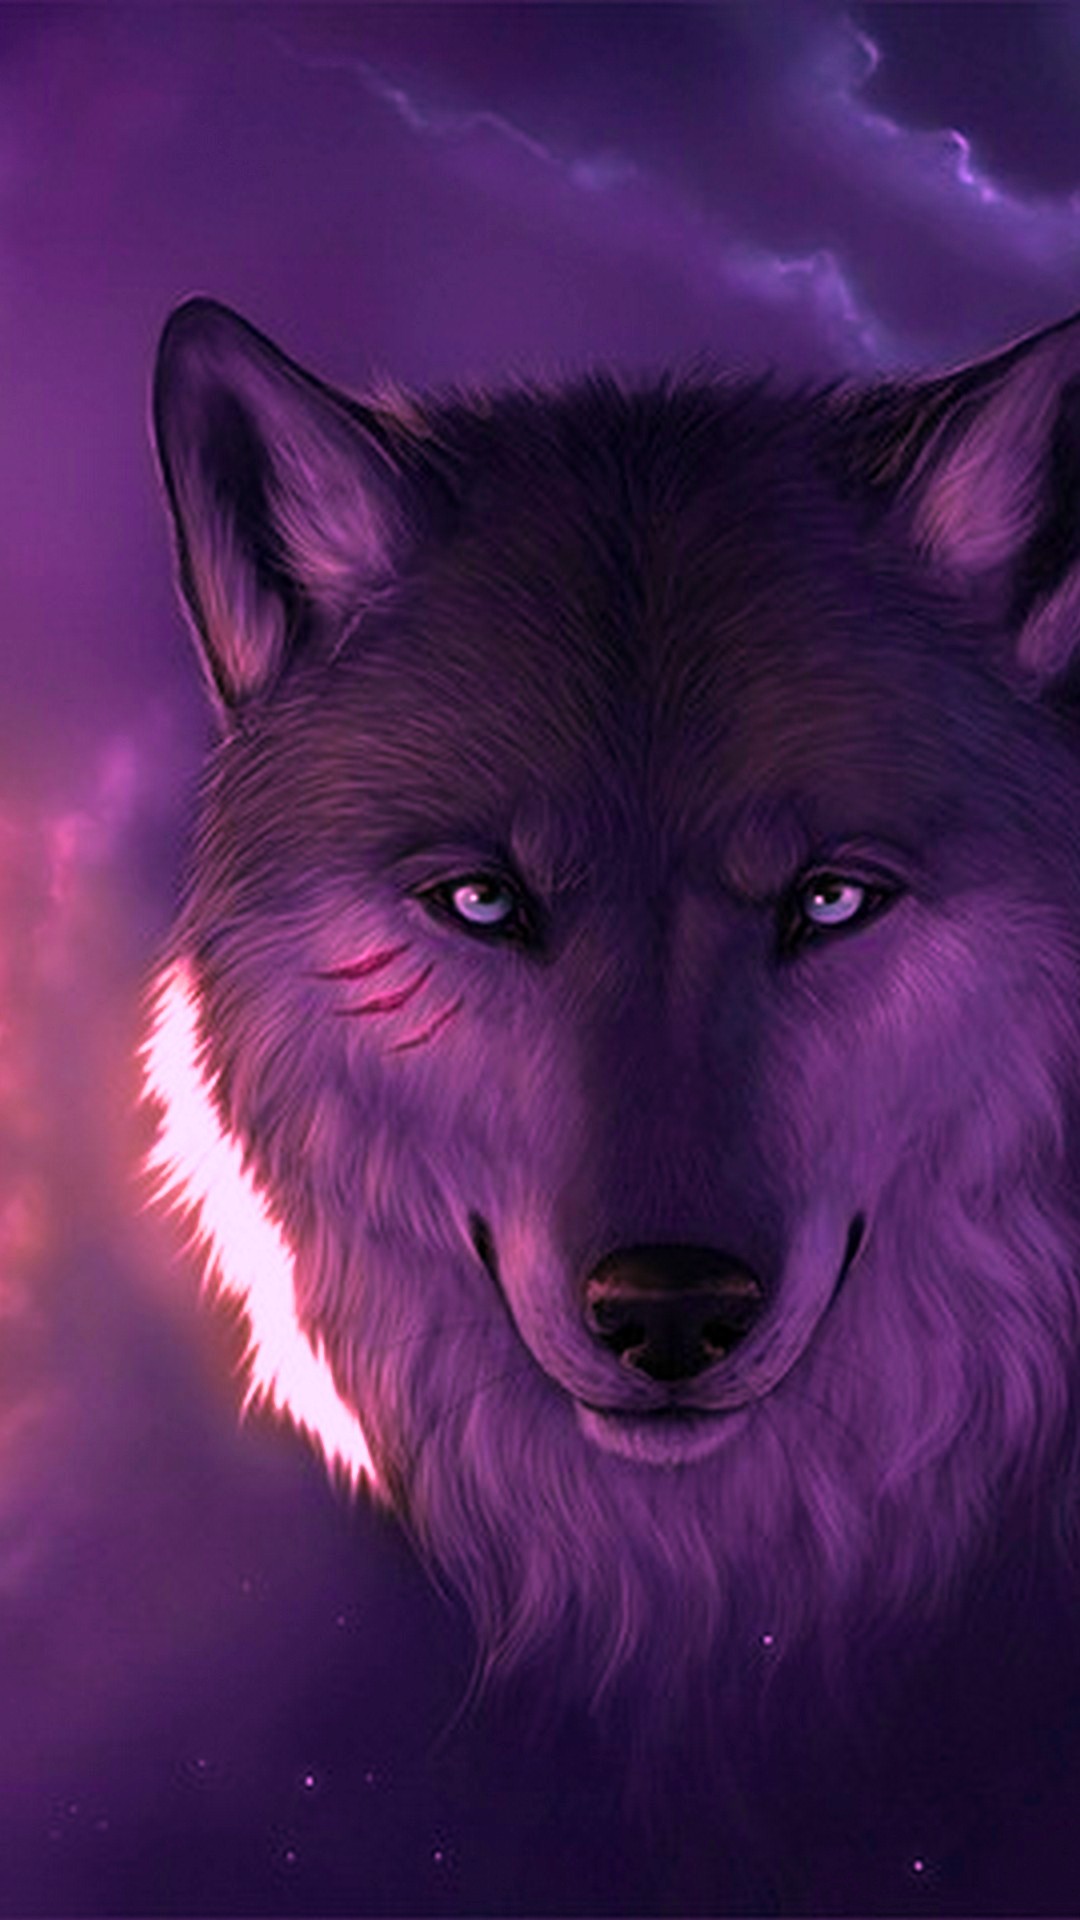 Cool Wolf Android Wallpaper with high-resolution 1080x1920 pixel. You can use this wallpaper for your Android backgrounds, Tablet, Samsung Screensavers, Mobile Phone Lock Screen and another Smartphones device